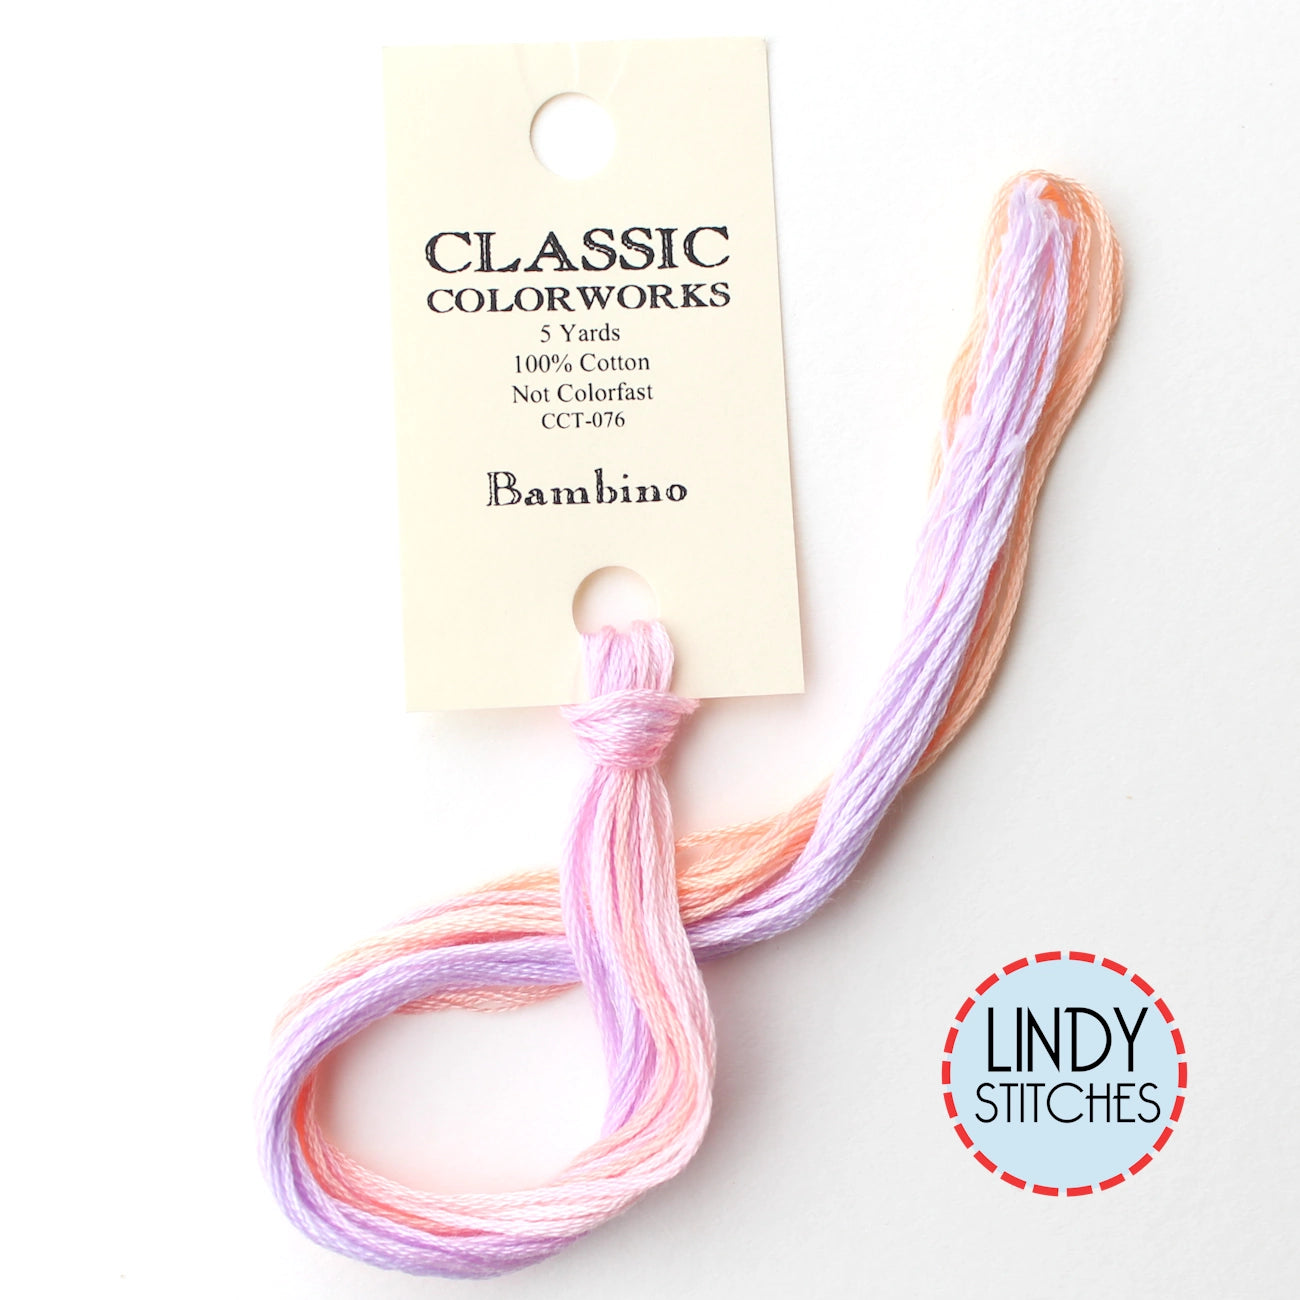 Bambino Classic Colorworks Floss Hand Dyed Cotton Skein